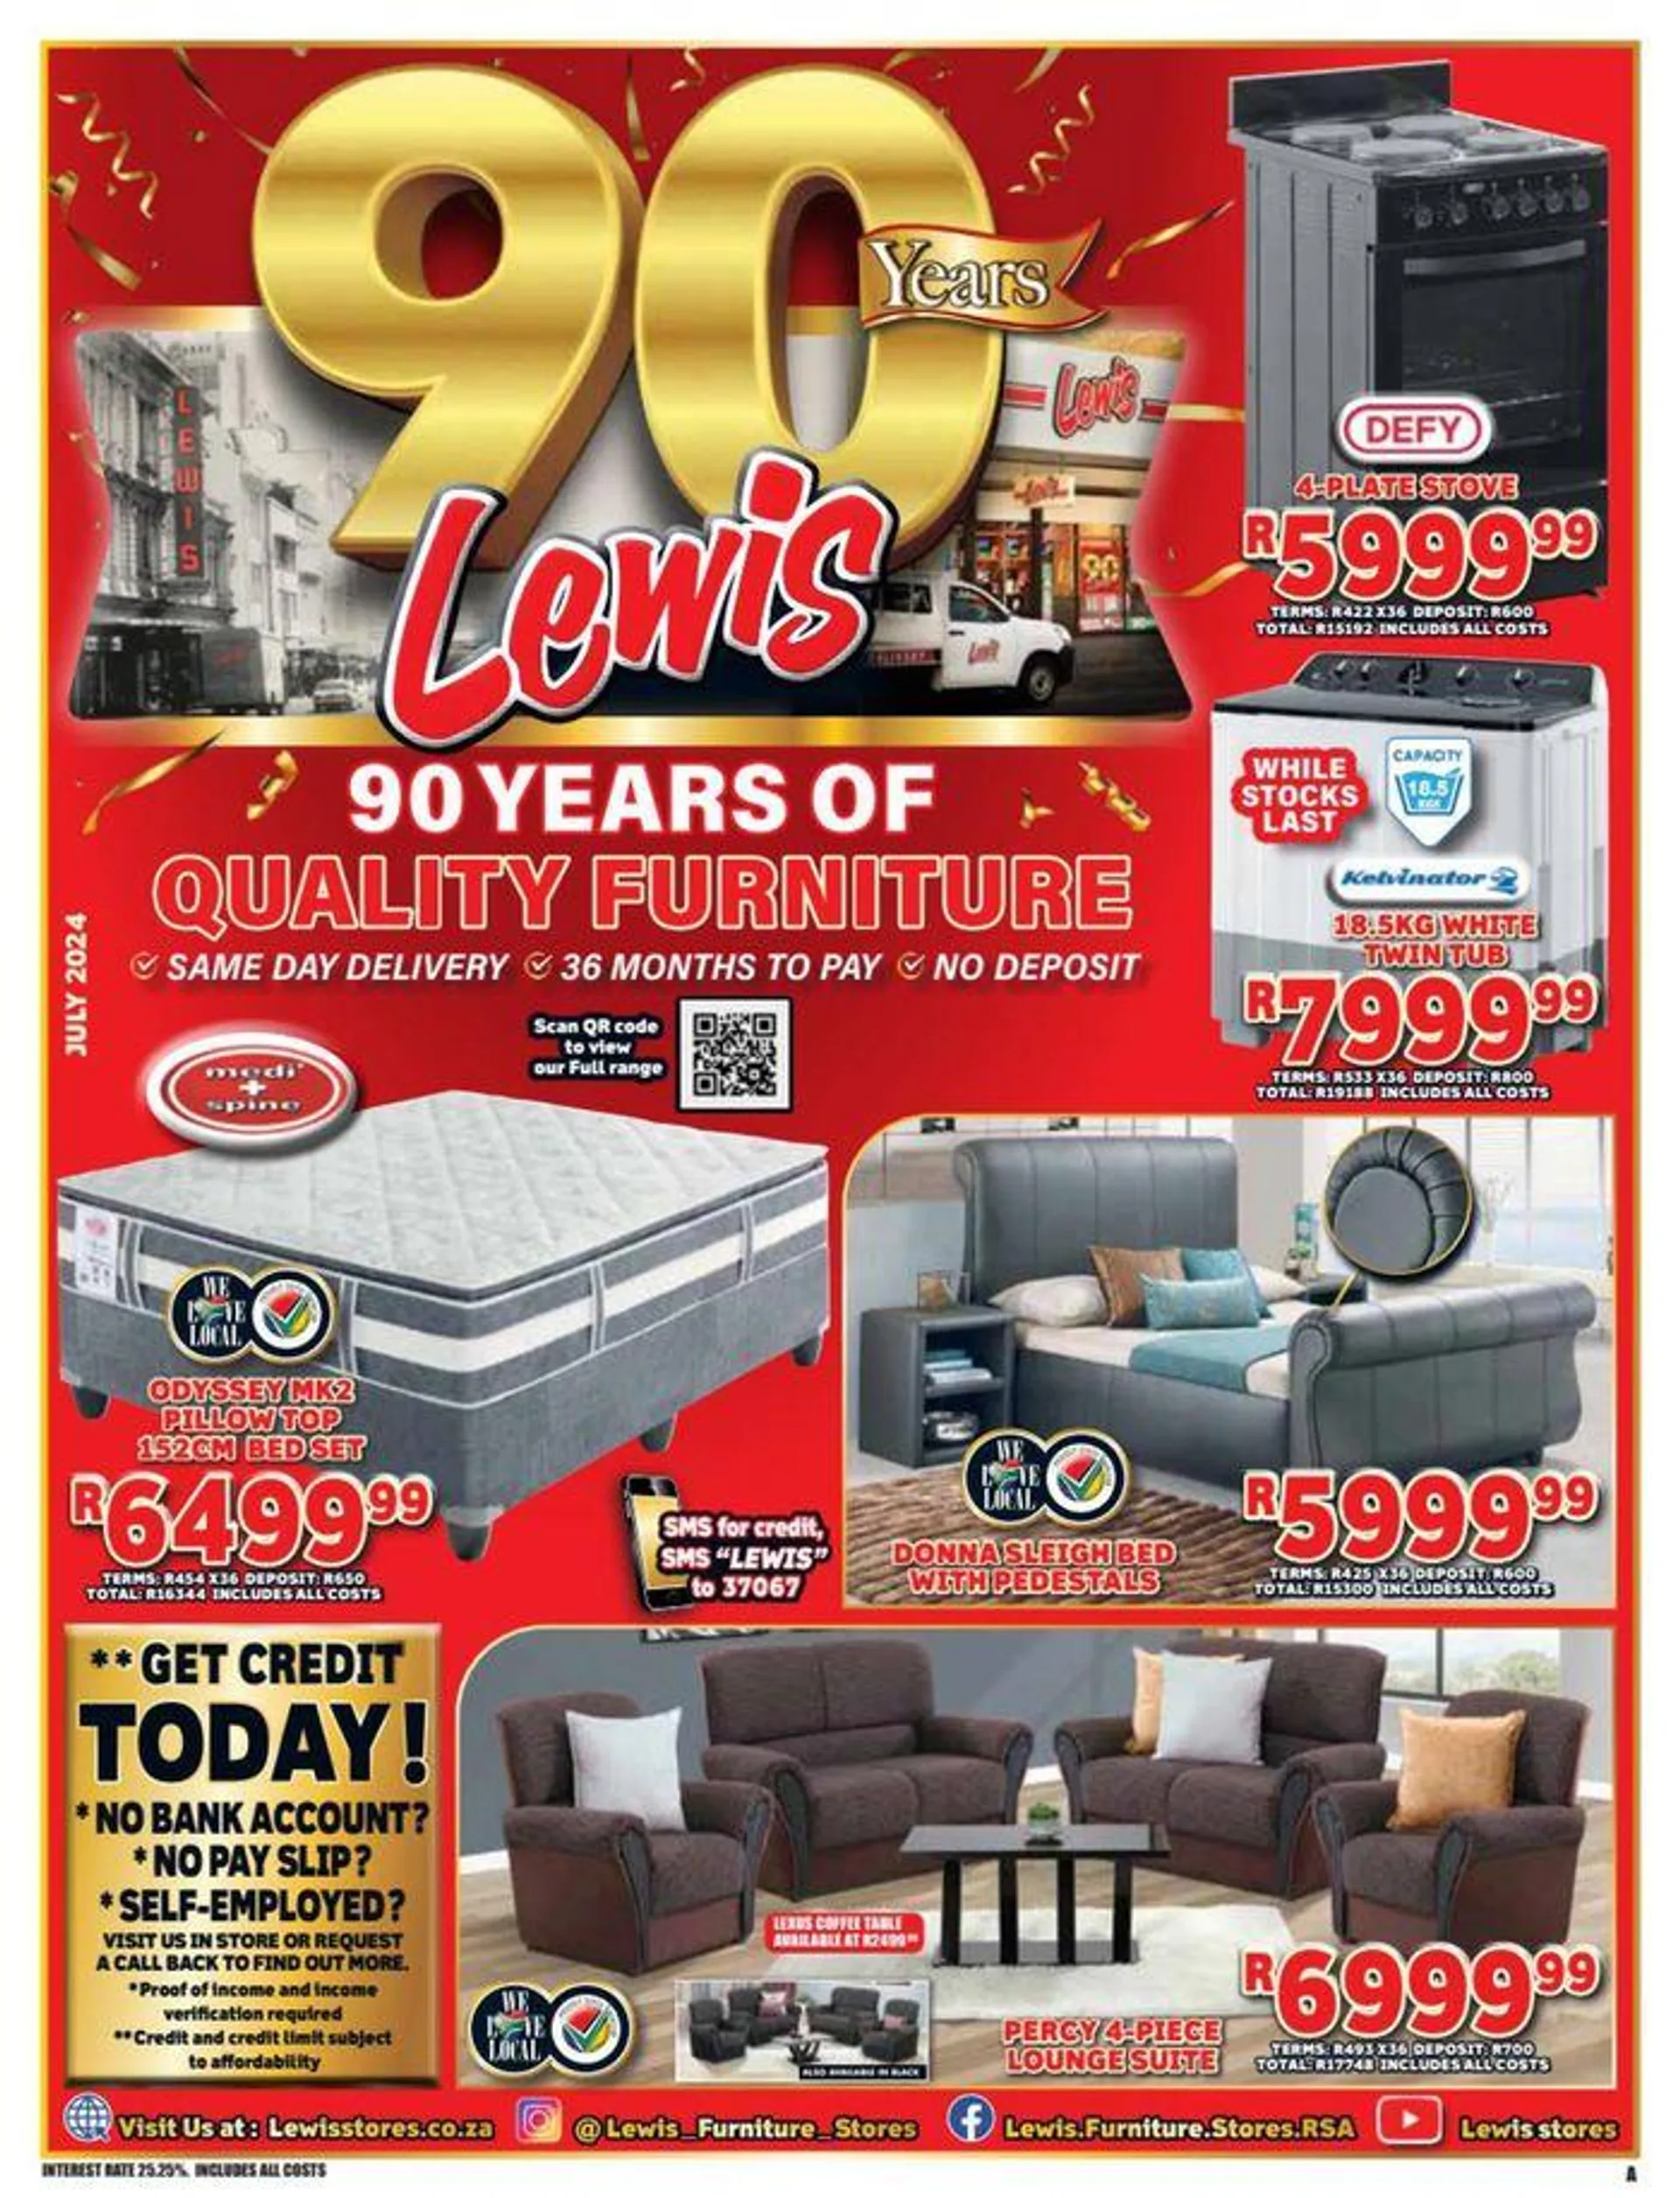 90 Years of quality furniture! - 1